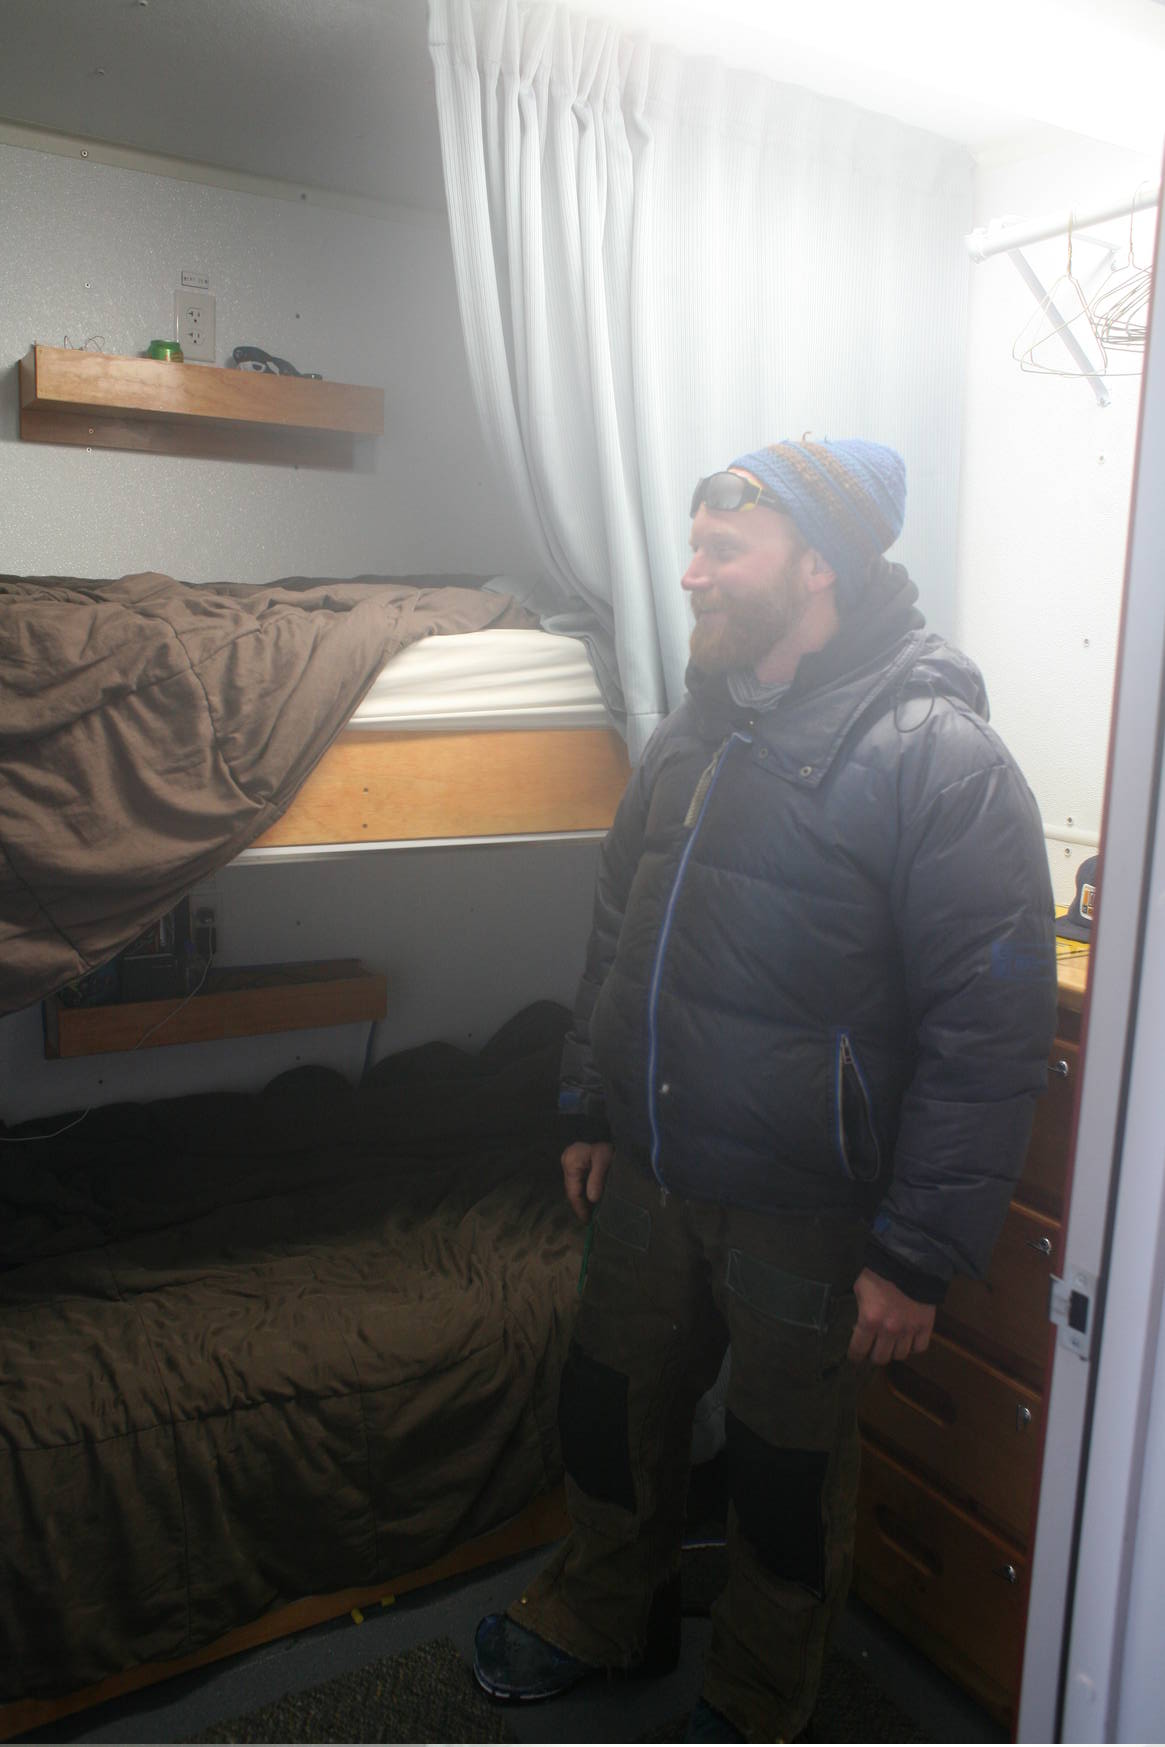 Thanks, Kevin, for giving us a tour! Here he is showing us the bunk beds for sleeping along the trail.